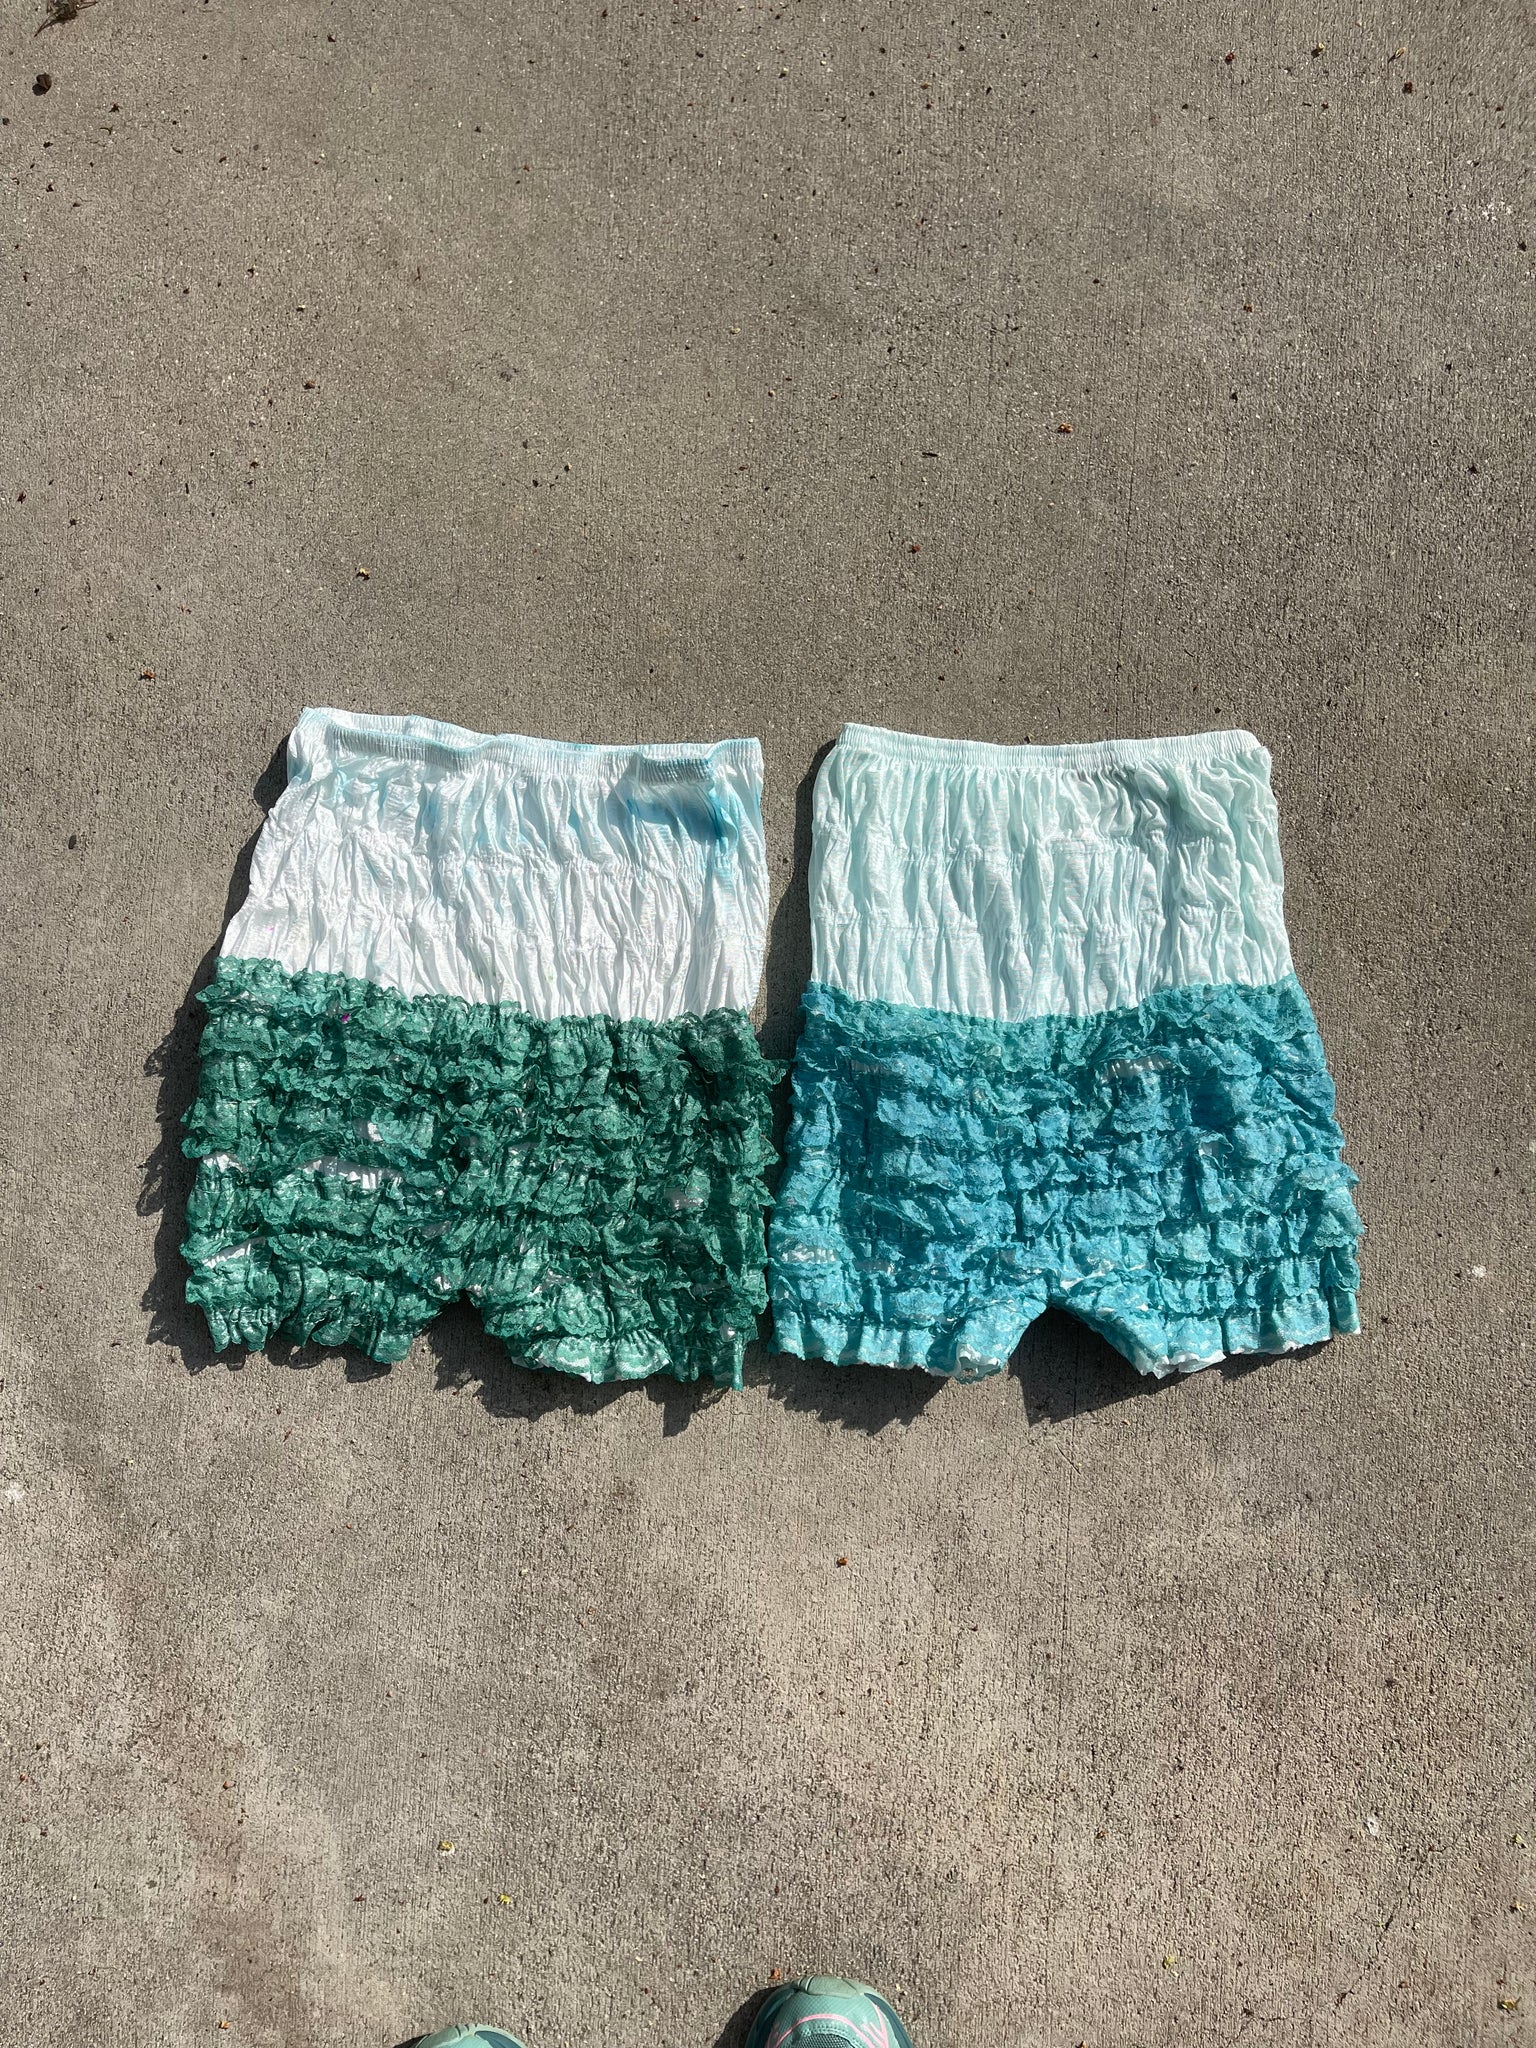 lace bloomers